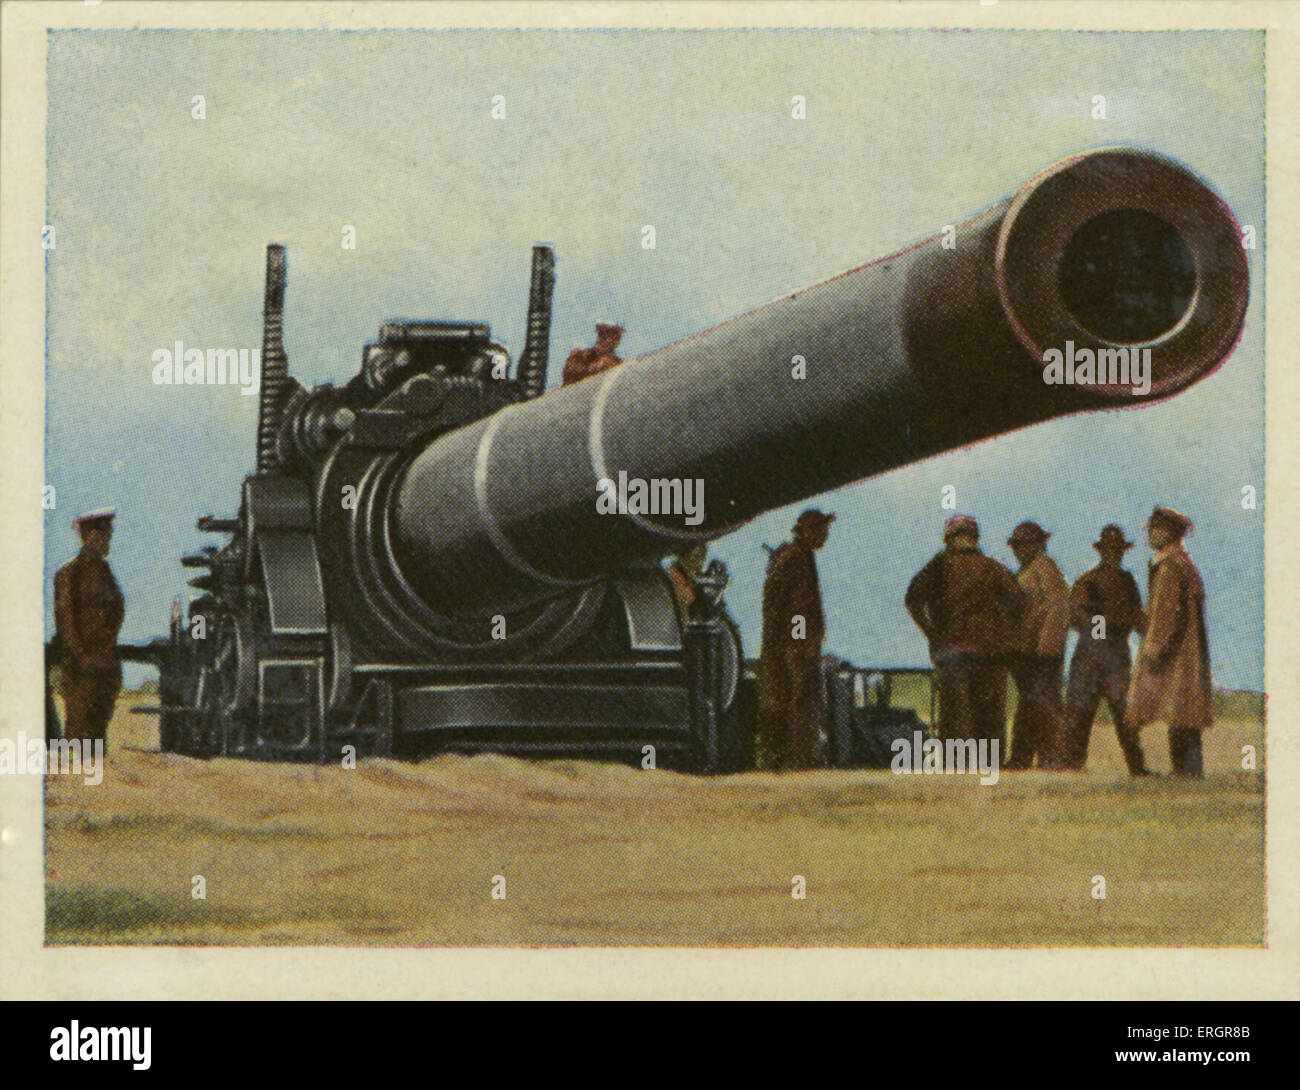 American ' s largest canon for shore defense. Calibre 42 cm,barrel length 12.5 metres, firing range 30 km. (Source: Cigarette cards published in Germany c.1934 reviewing military equipment in arms race prior to WW2) Stock Photo